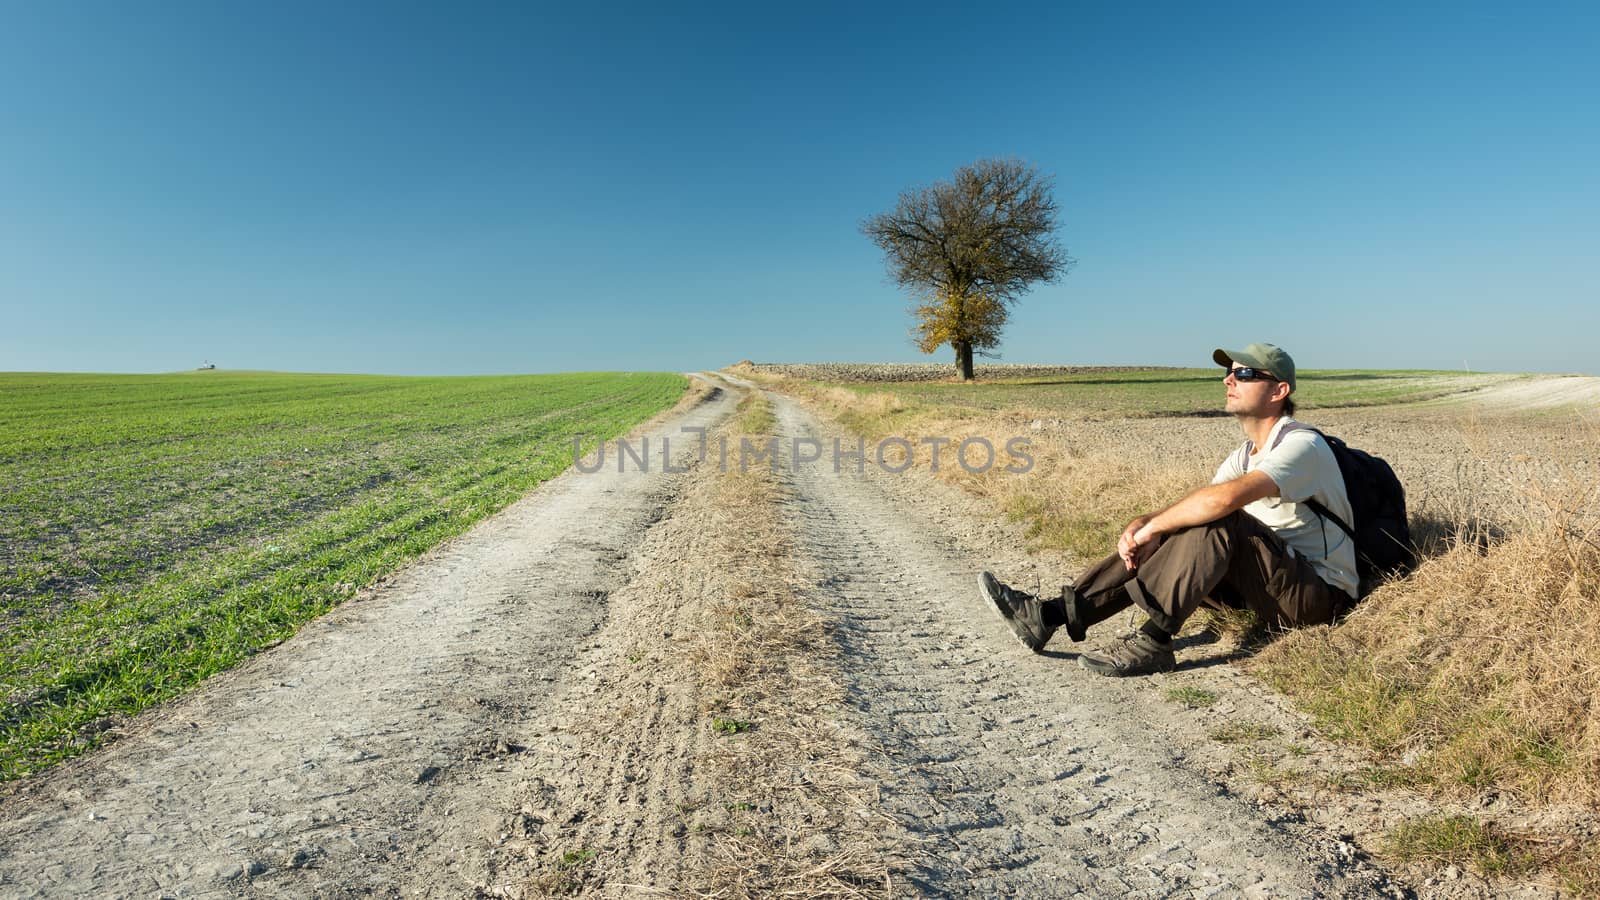 A man sitting by the road, fields and a lonely tree by darekb22